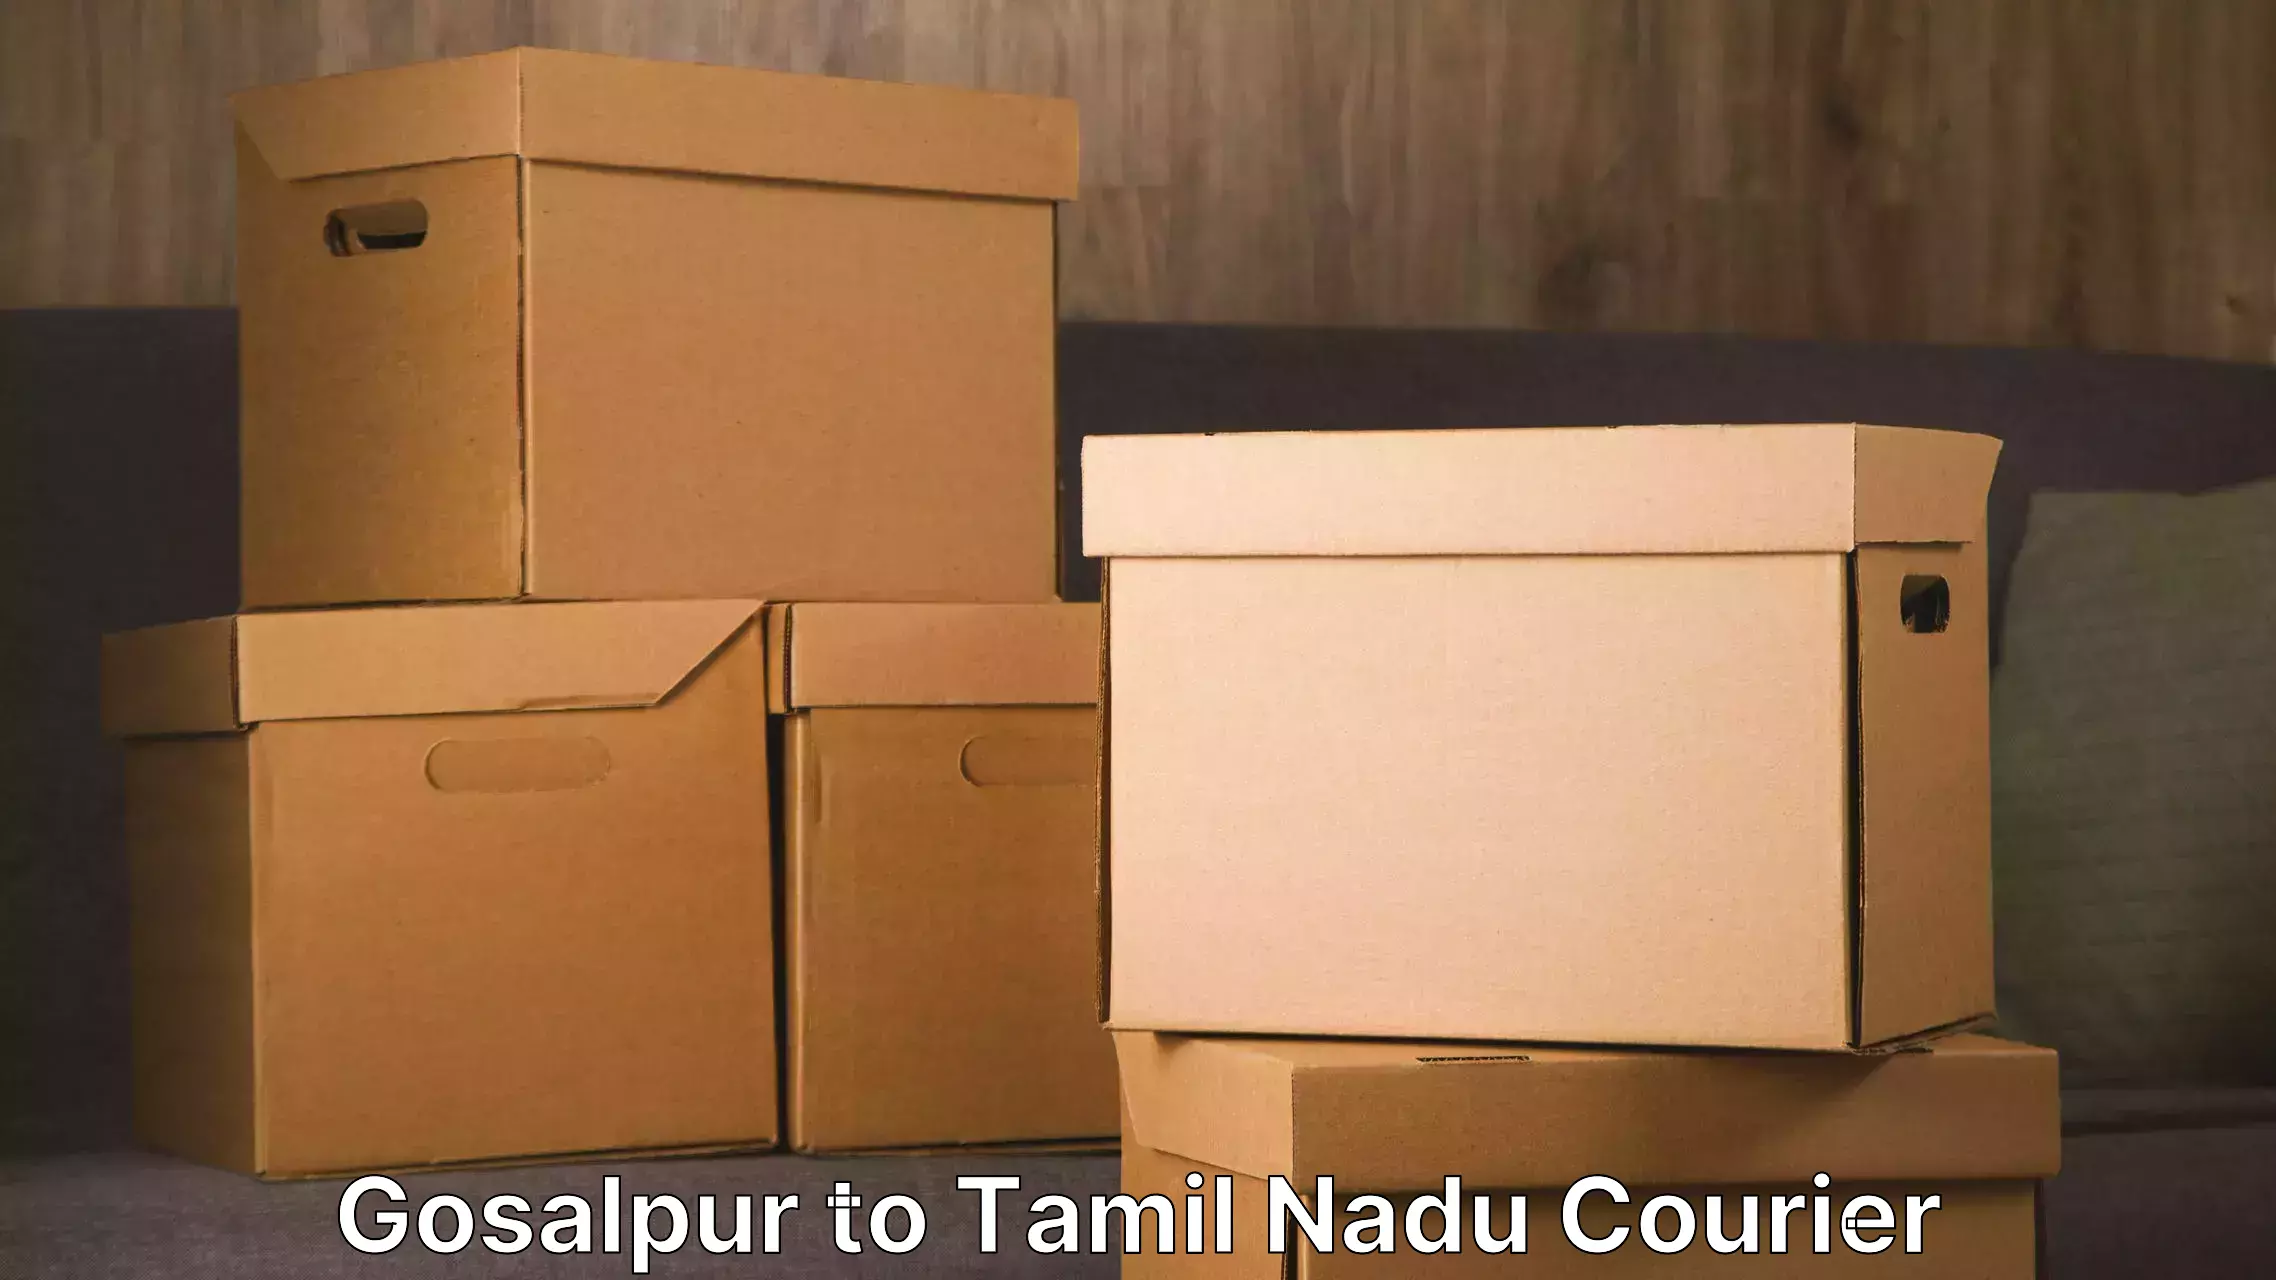 Furniture delivery service Gosalpur to Mettupalayam